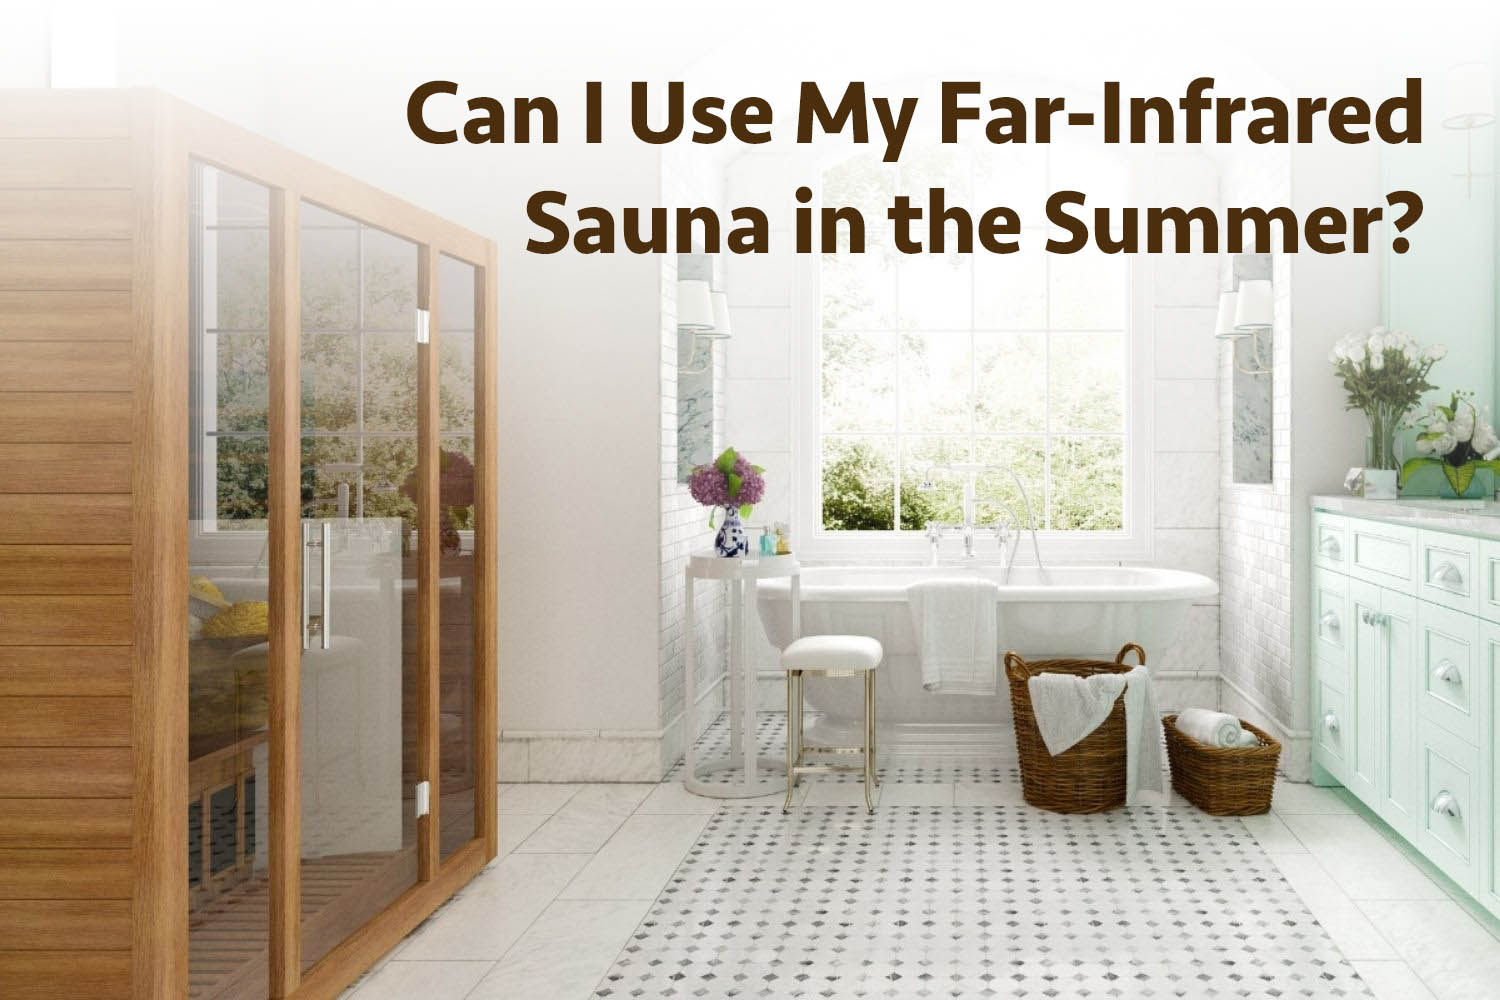 Can I Use My Far-Infrared Sauna in the Summer?